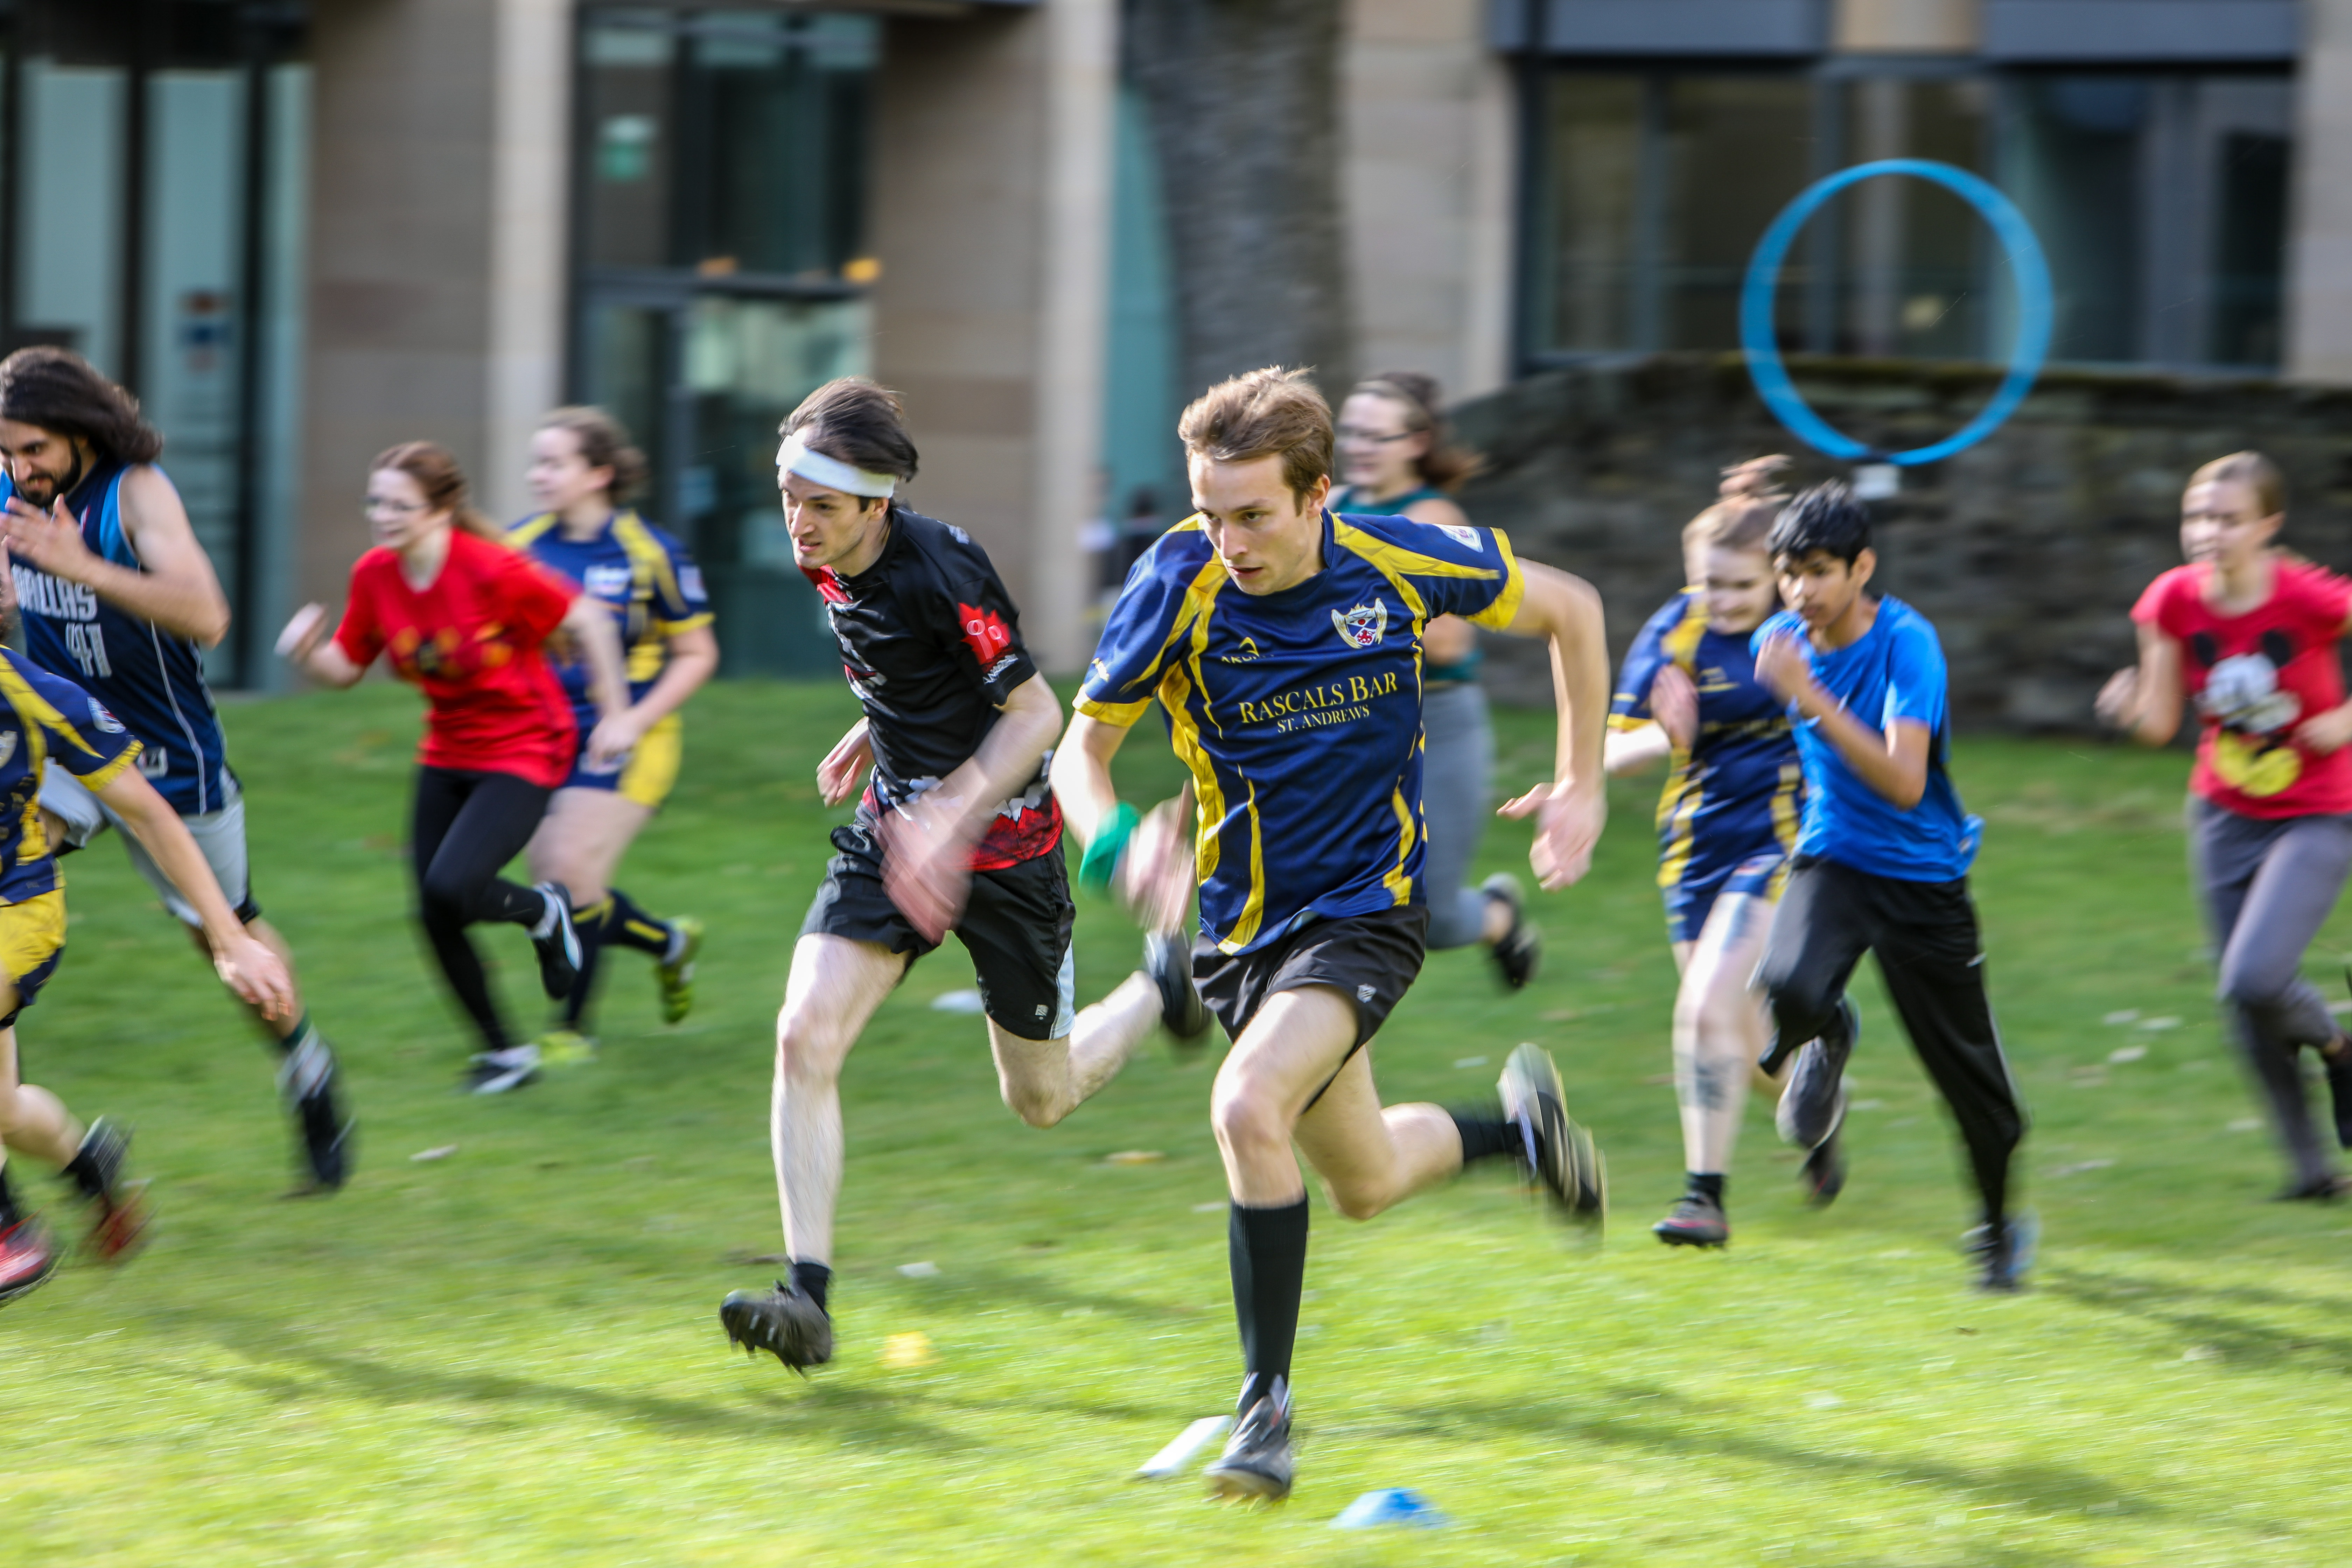 Members of St Andrews Snidgets Quidditch Club want quidditch to be taken more seriously as a sport.